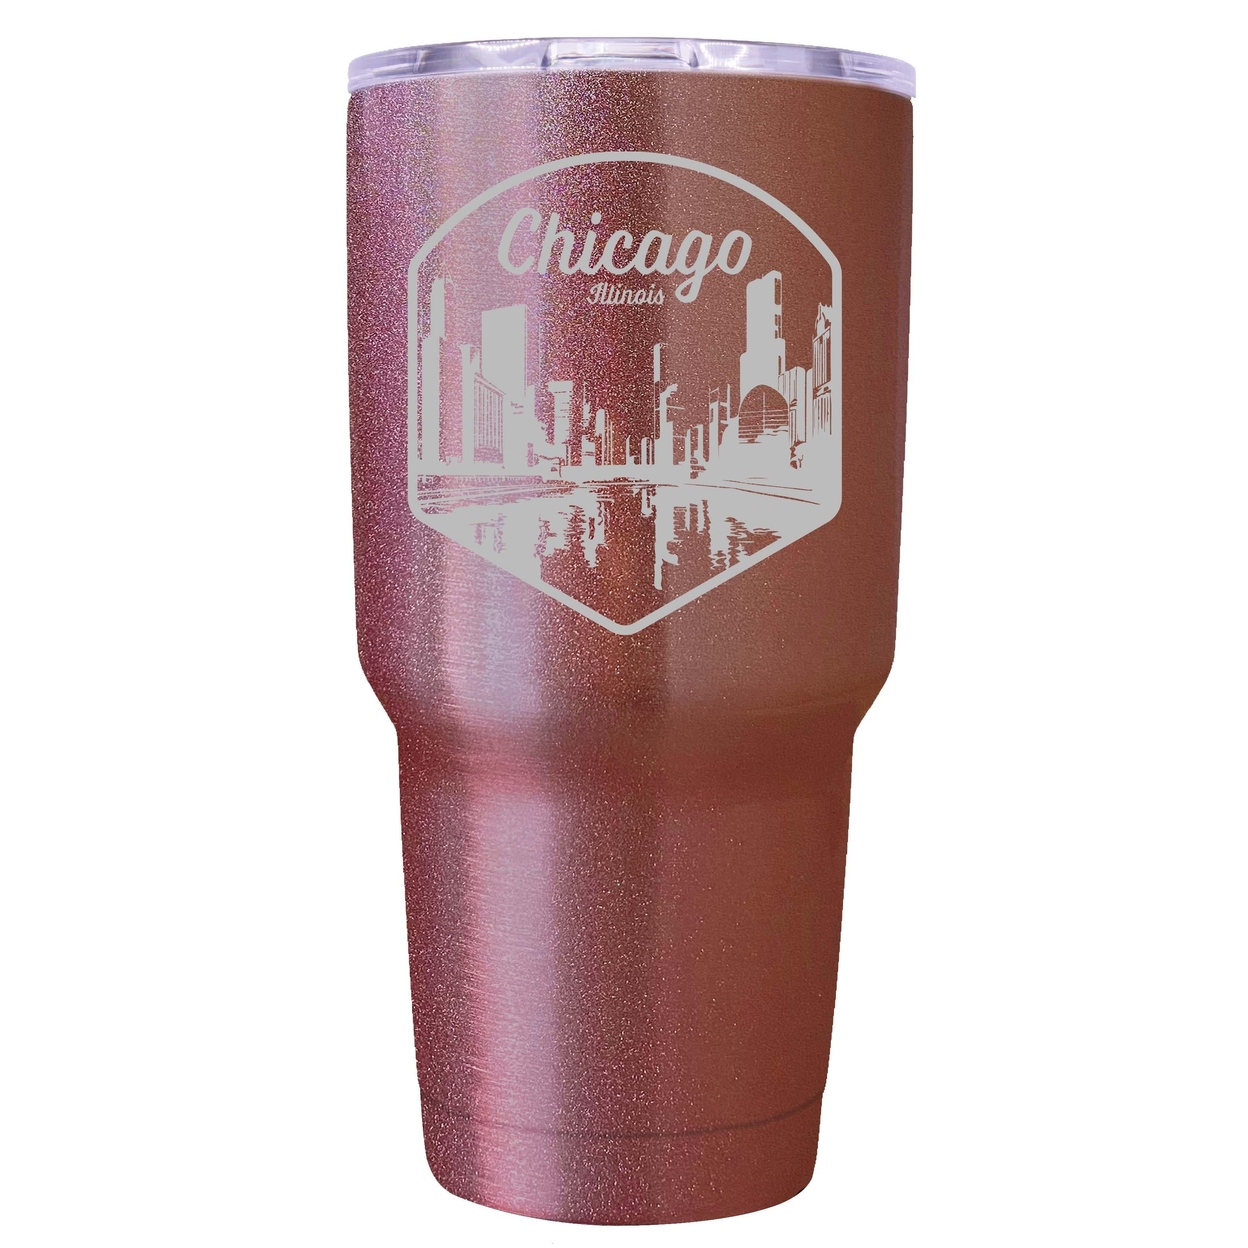 Chicago Illinois Souvenir 24 Oz Engraved Insulated Tumbler - Rose Gold,,2-Pack